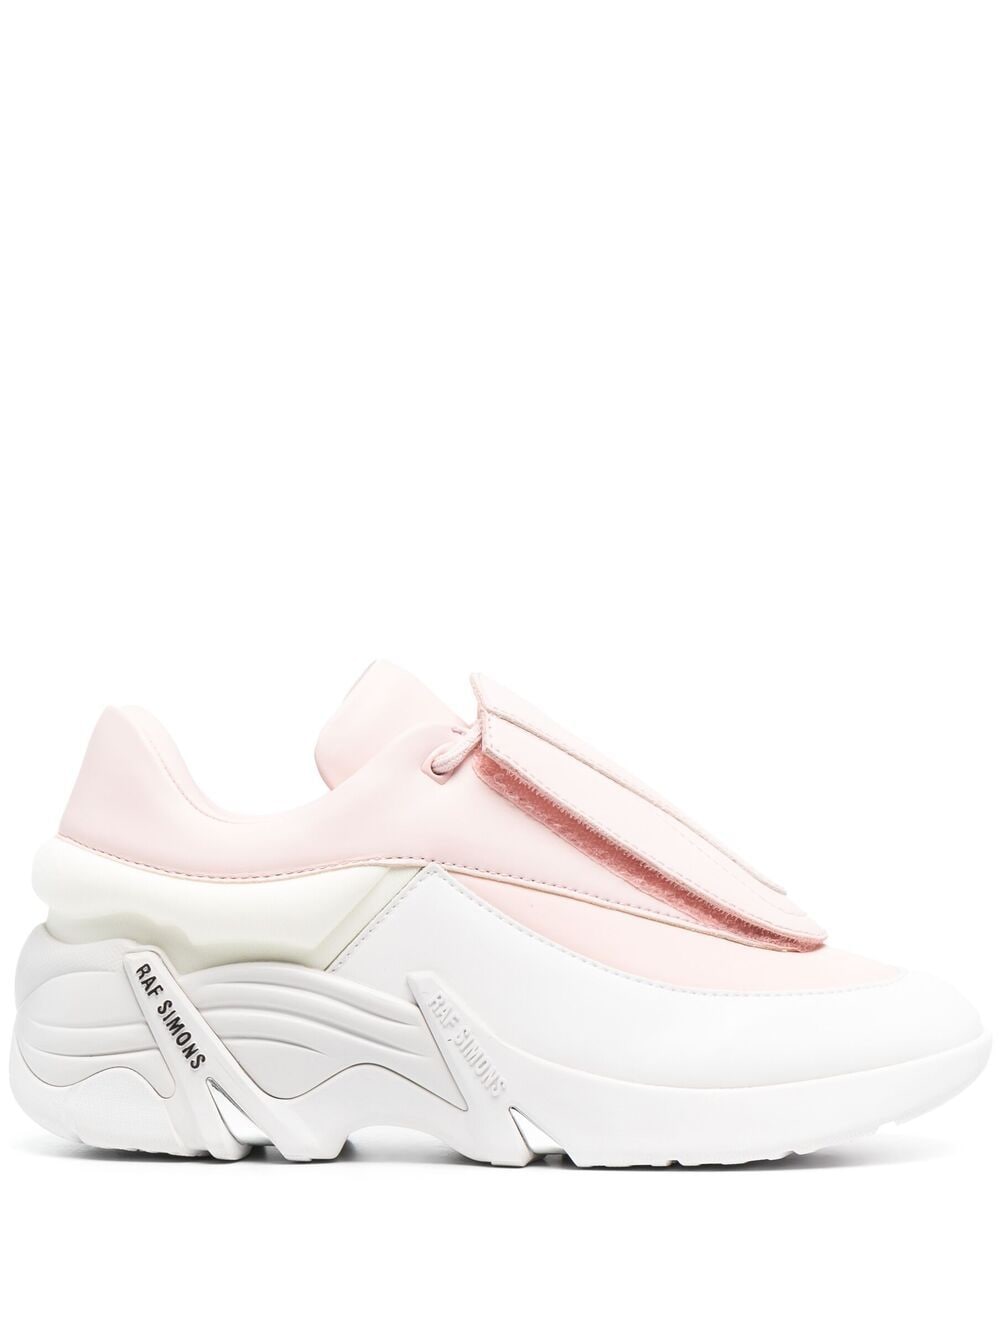 RAF SIMONS TWO-TONE OVERSIZE-SOLE trainers